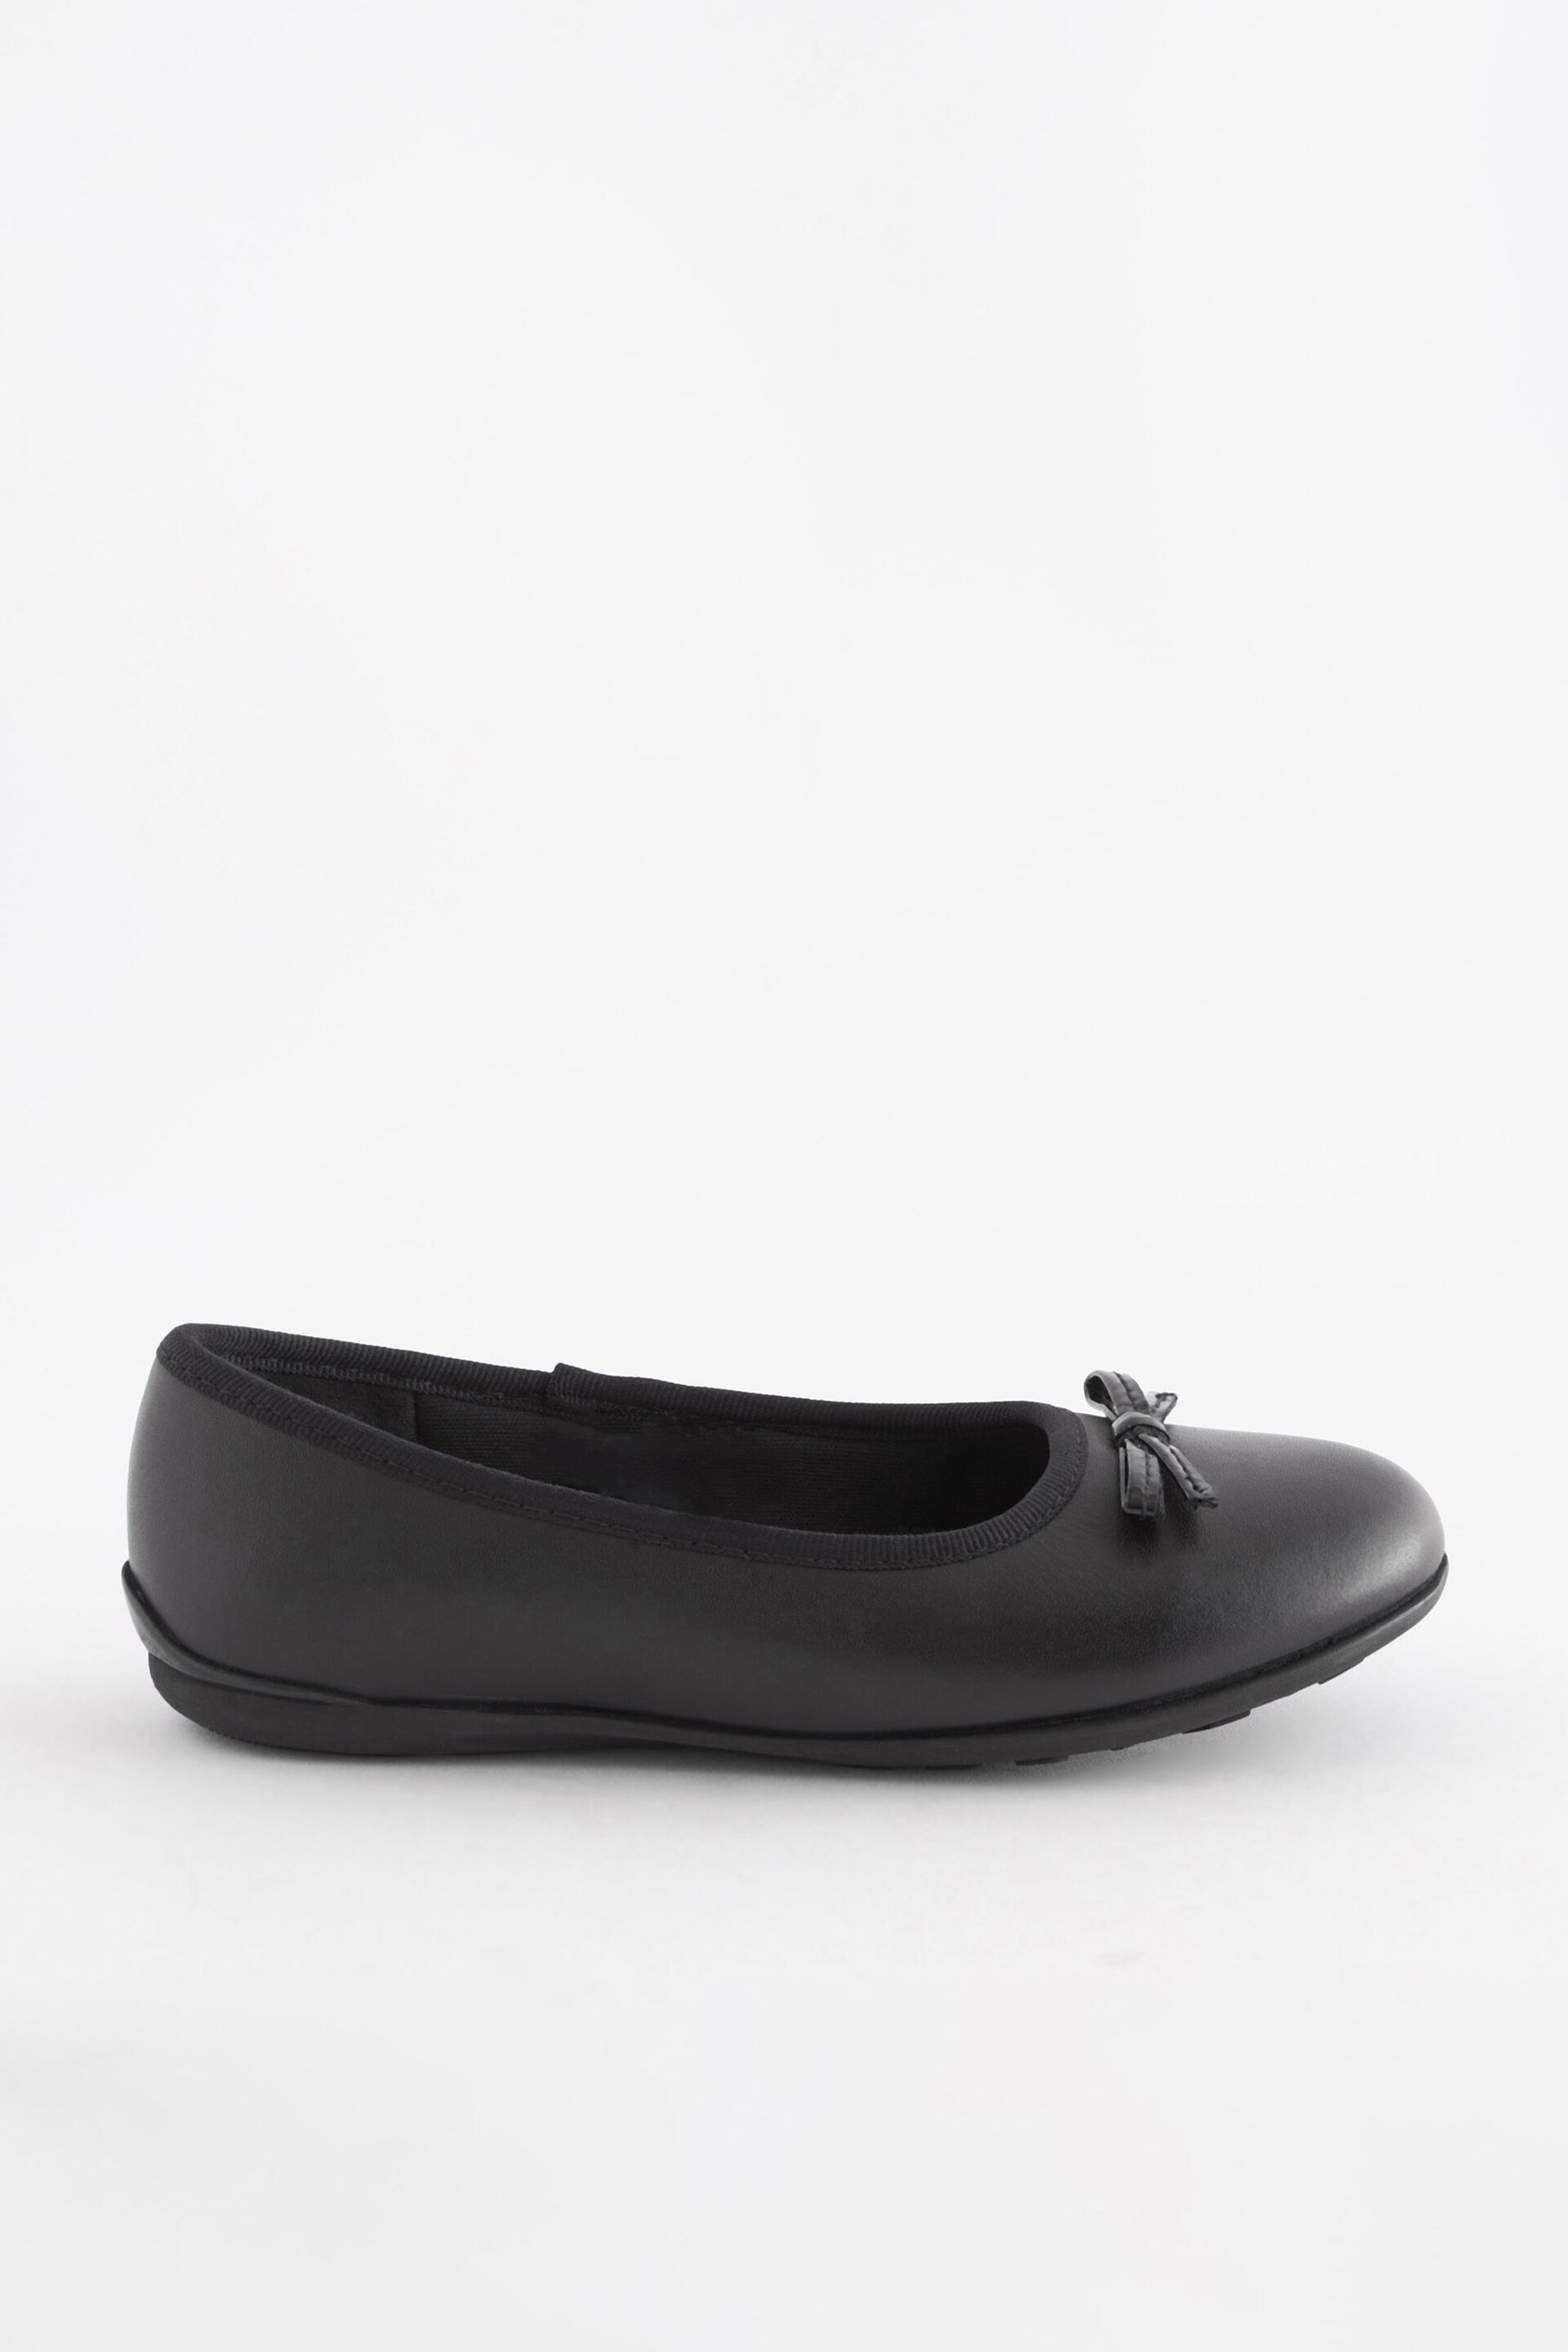 Black Wide Fit (G) School Leather Ballet Shoes - Image 2 of 5